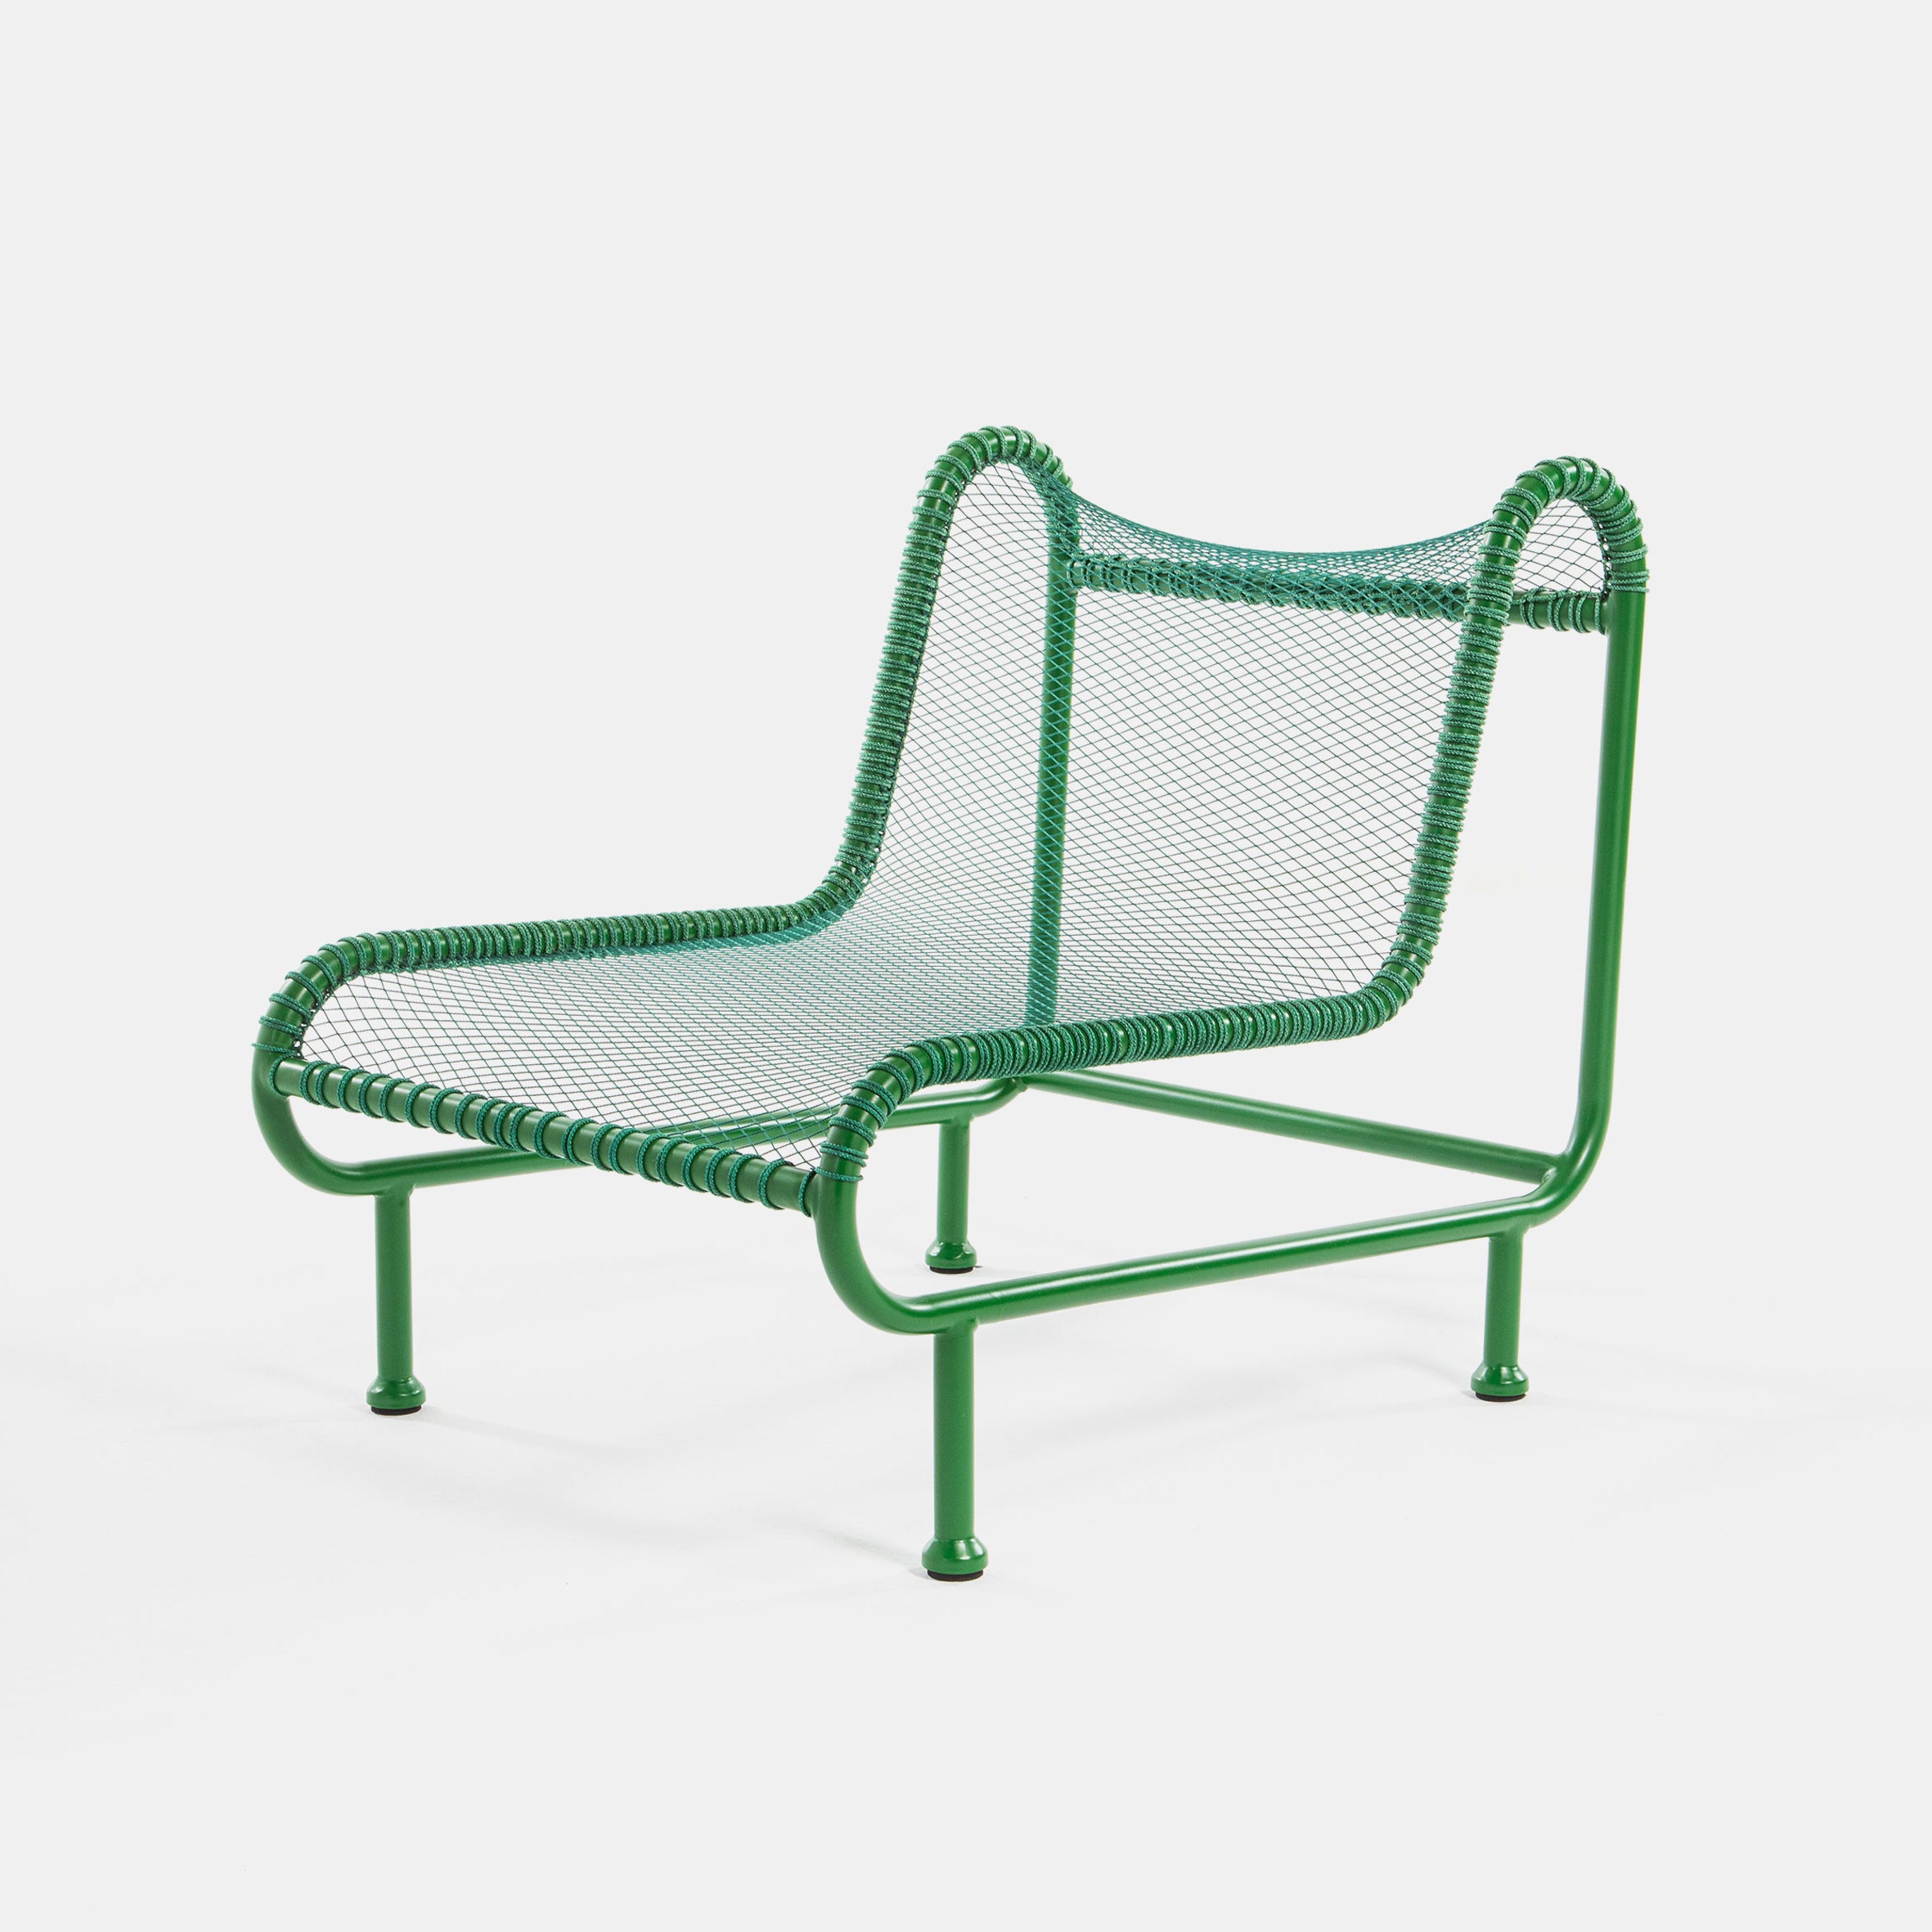 Grand Ribaud Outdoor Lounge Chair